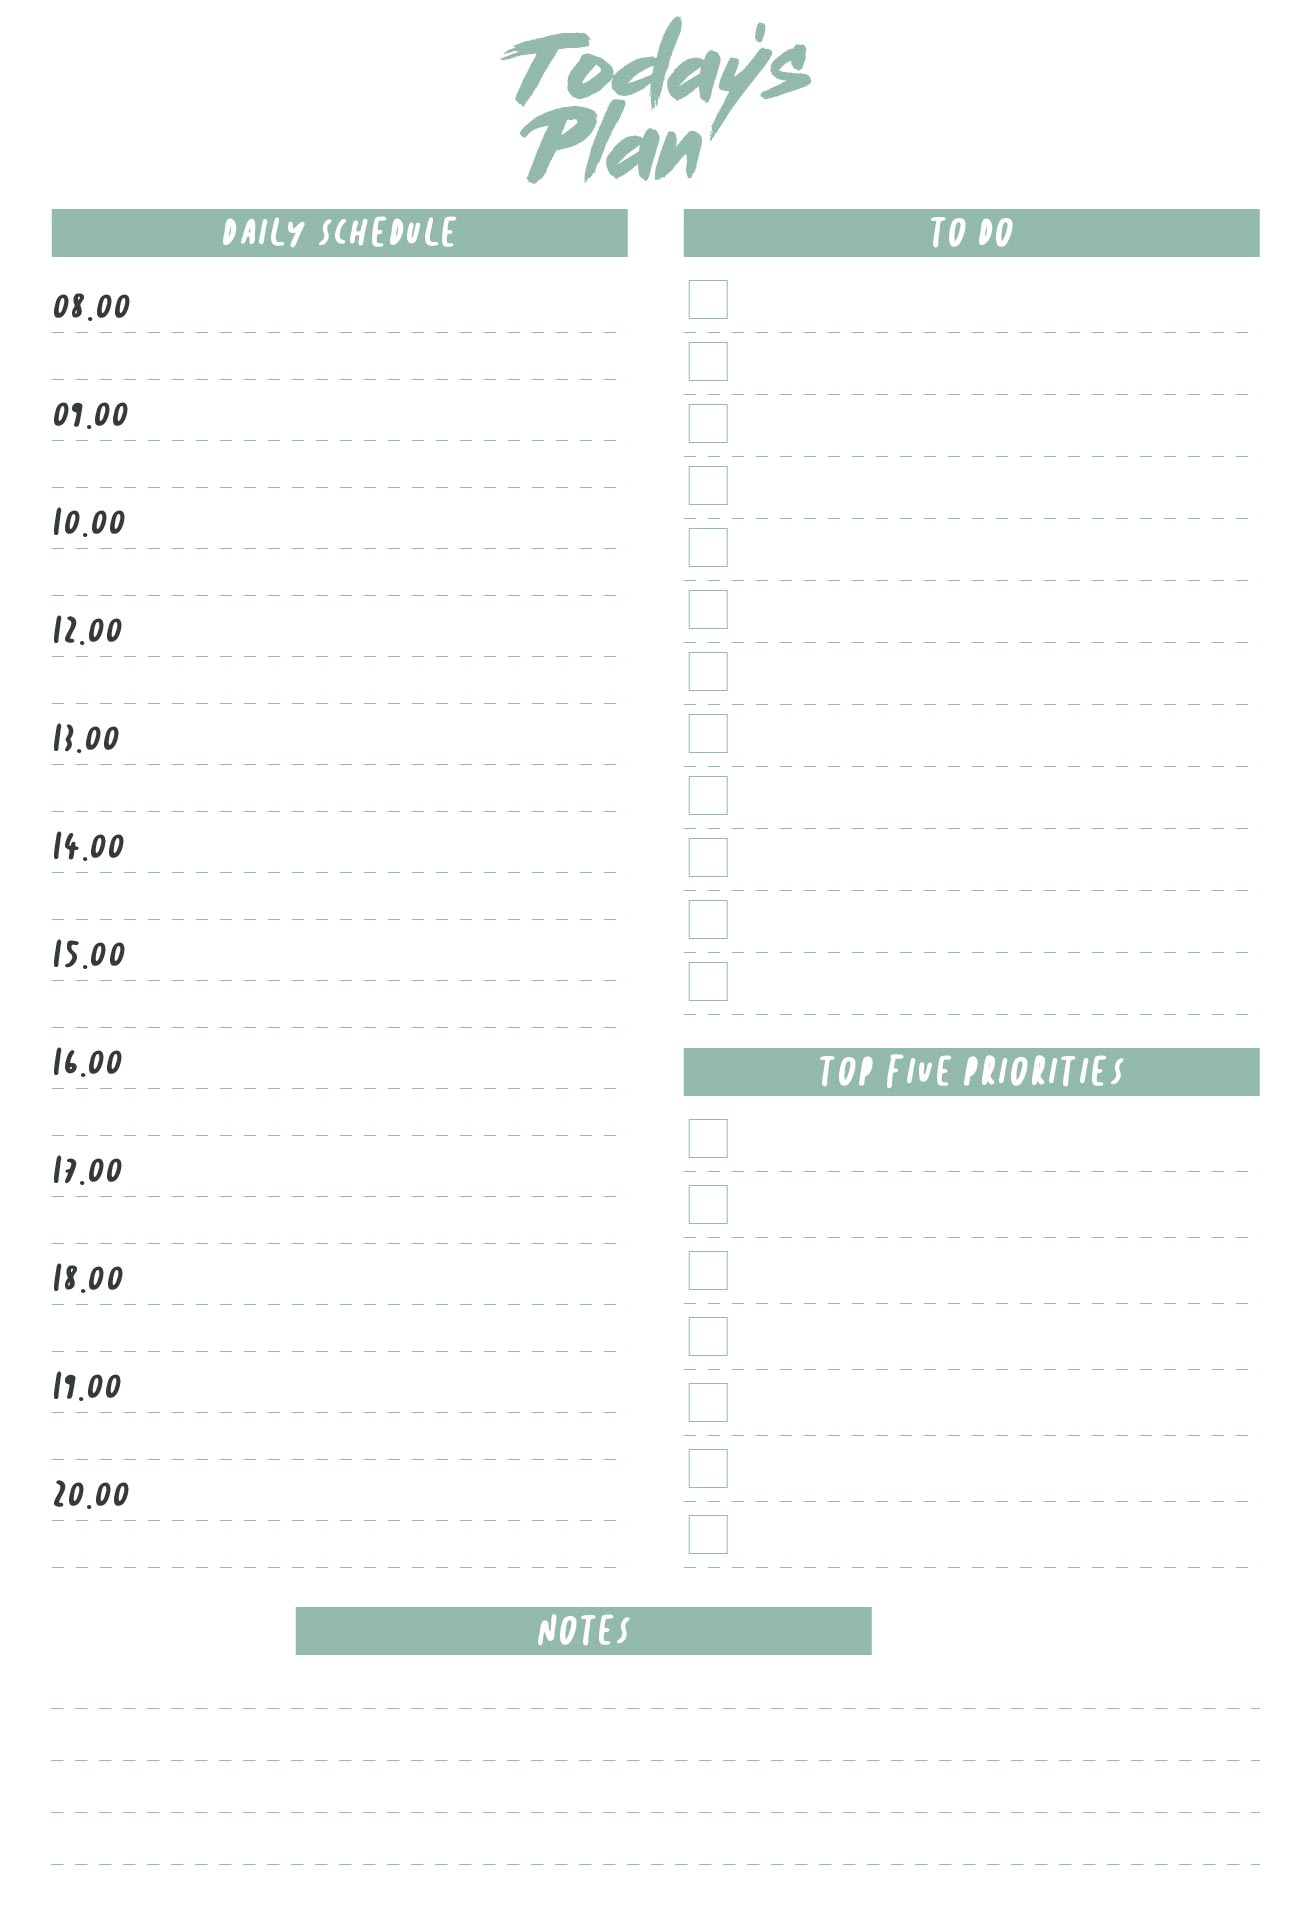 Printable Daily Hourly Schedule Template